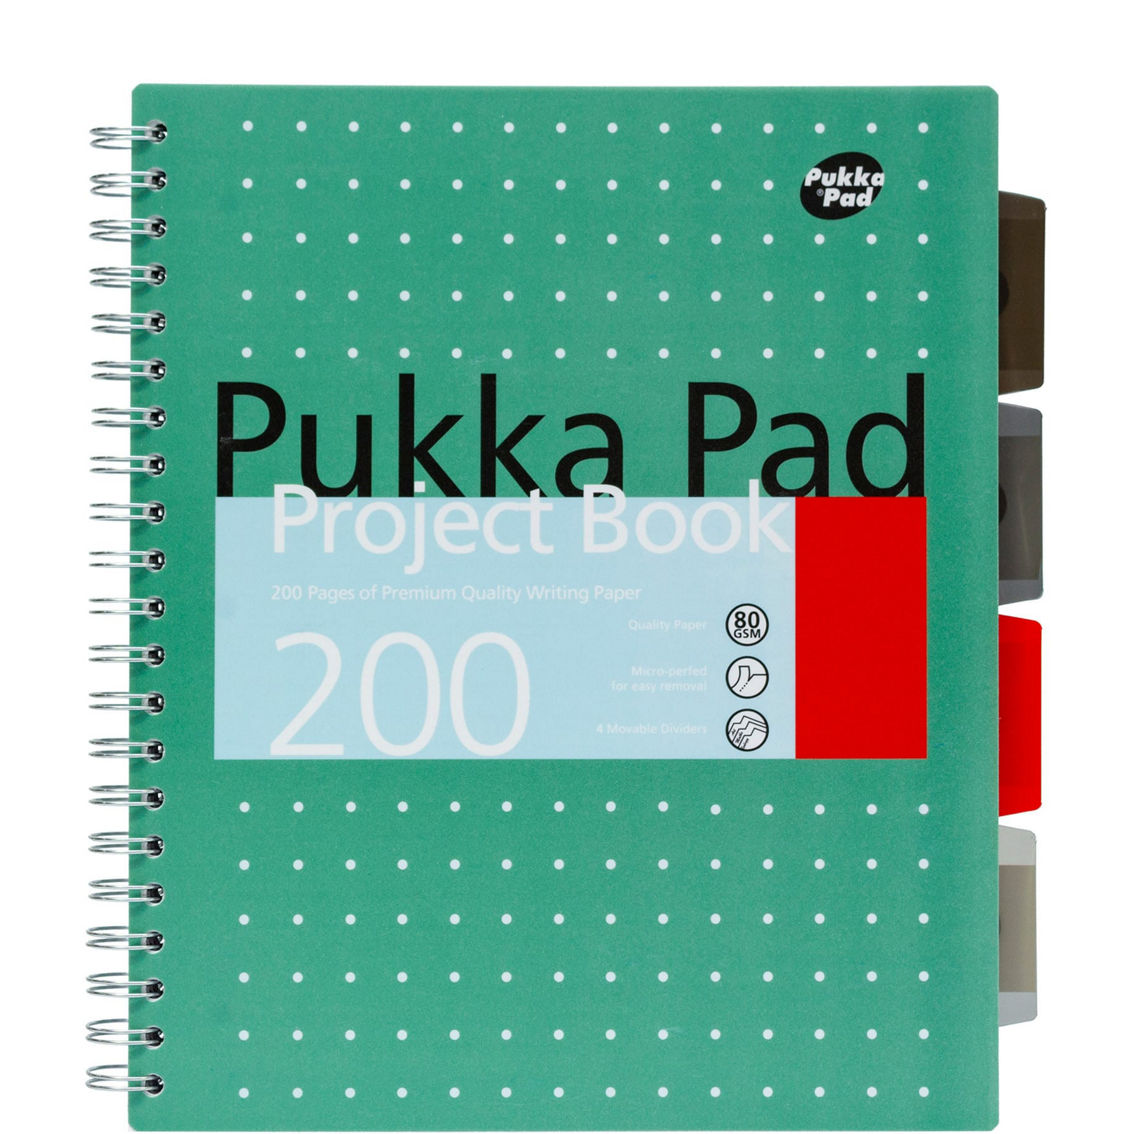 Pukka Pads Metallic Green Letter Sized Subject Divider Notebook - Pack 3 - Image 2 of 5